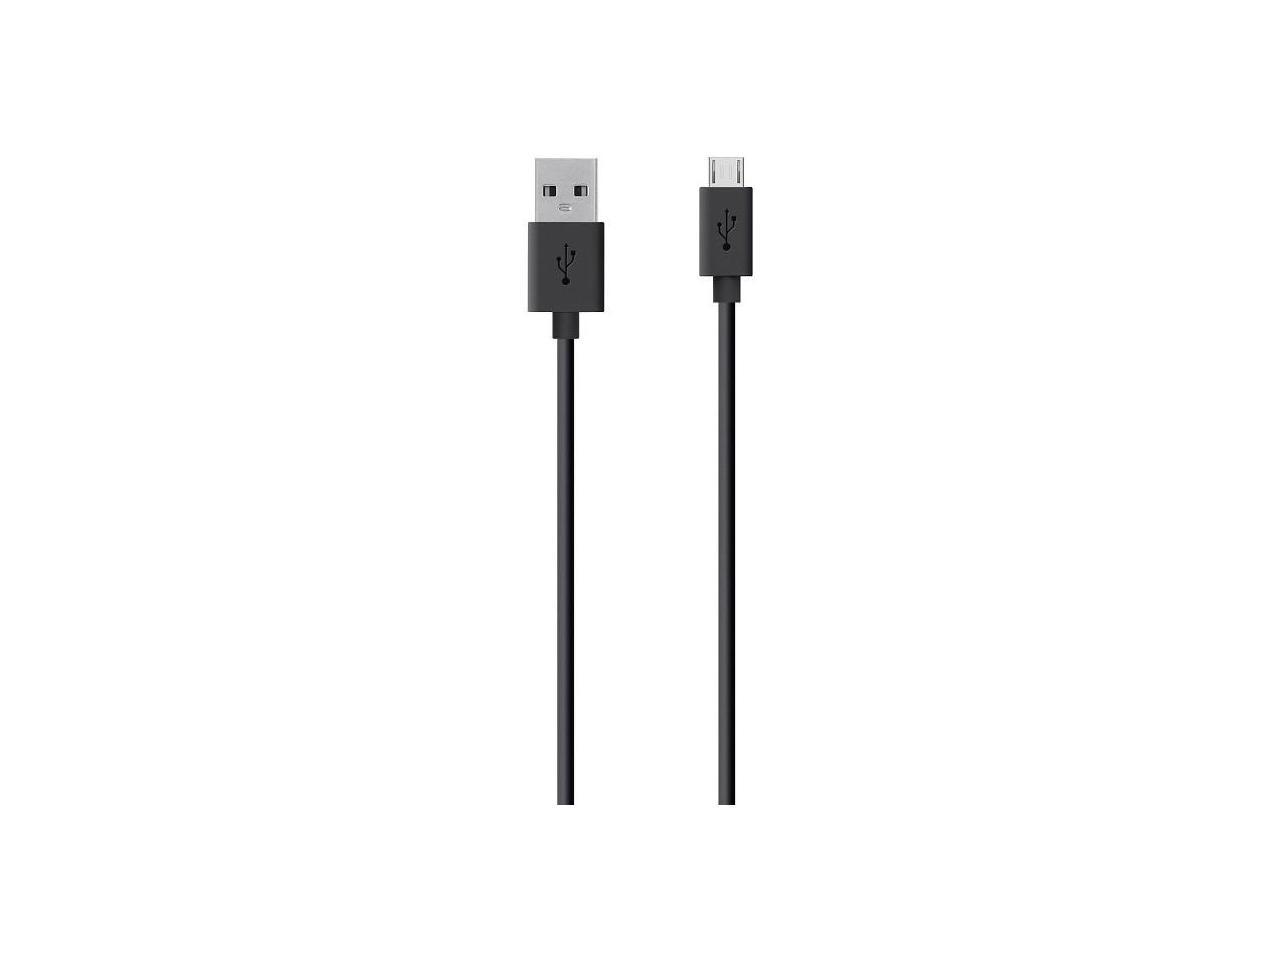 Belkin MIXIT? Micro USB ChargeSync Cable F2CU012bt3M-BLK - image 1 of 11